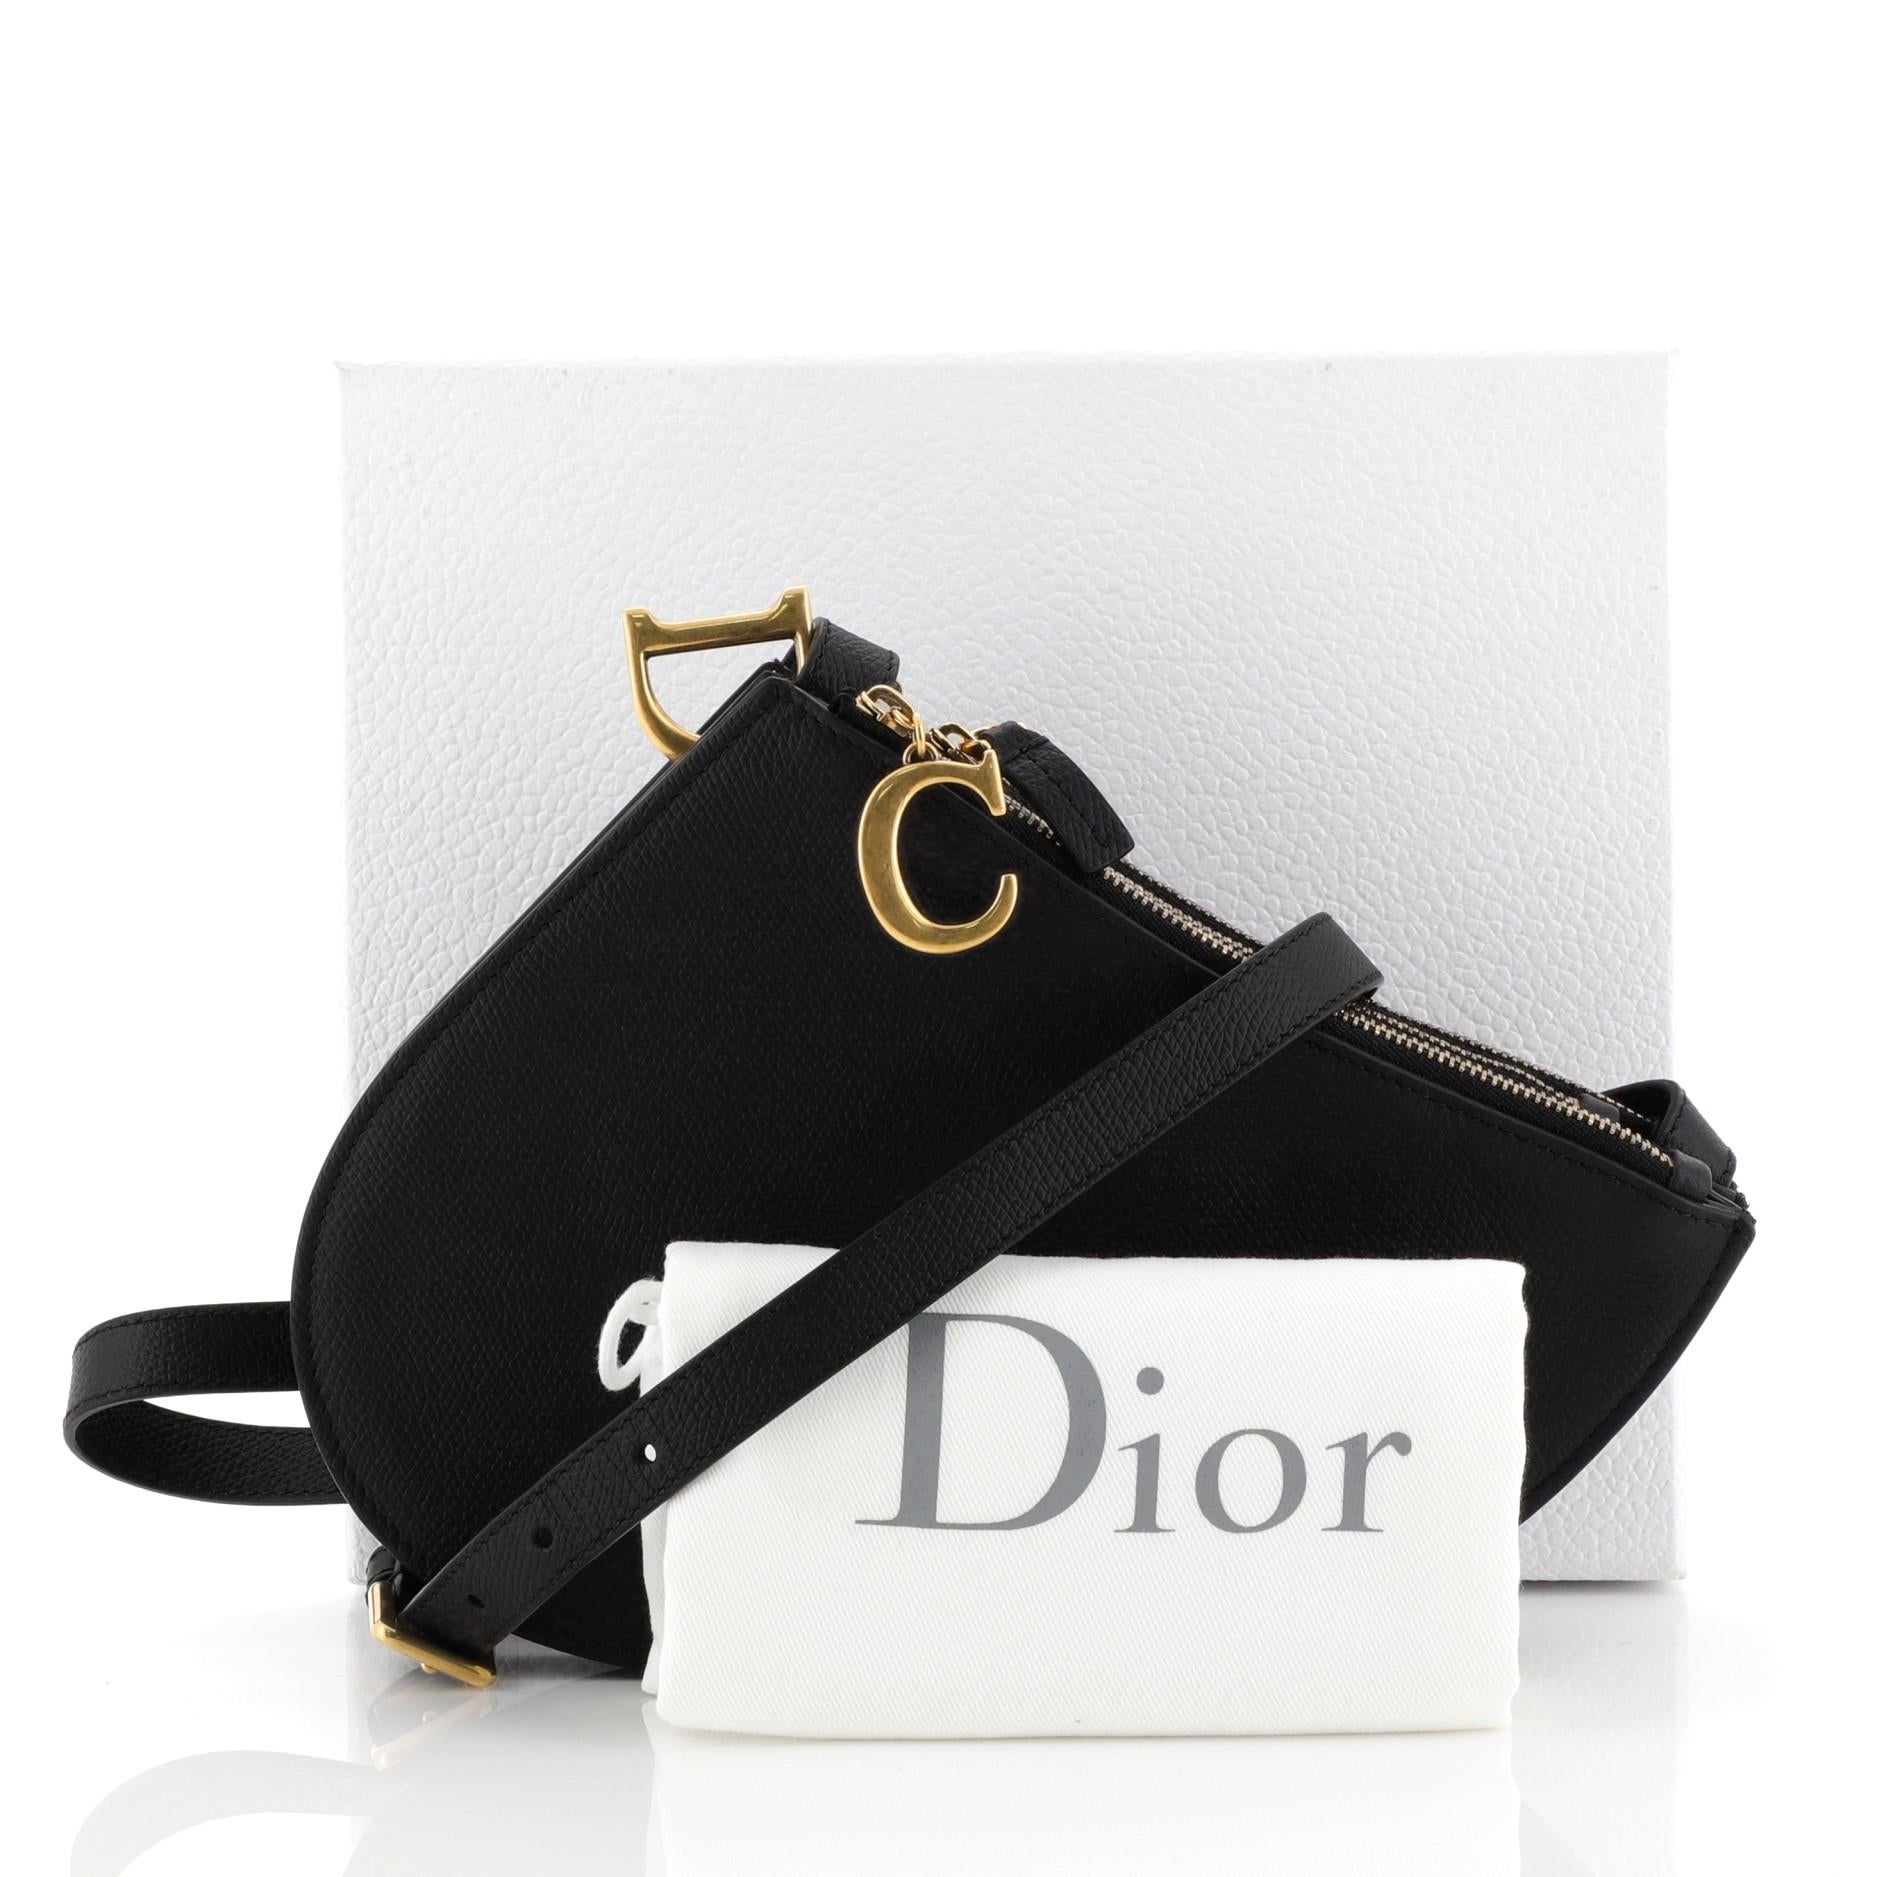 This Christian Dior Saddle Triple Zip Crossbody Clutch Leather, crafted from black leather, features an adjustable leather strap, saddle-shaped silhouette and aged gold-tone hardware. Its three-compartment zip closures opens to a black suede